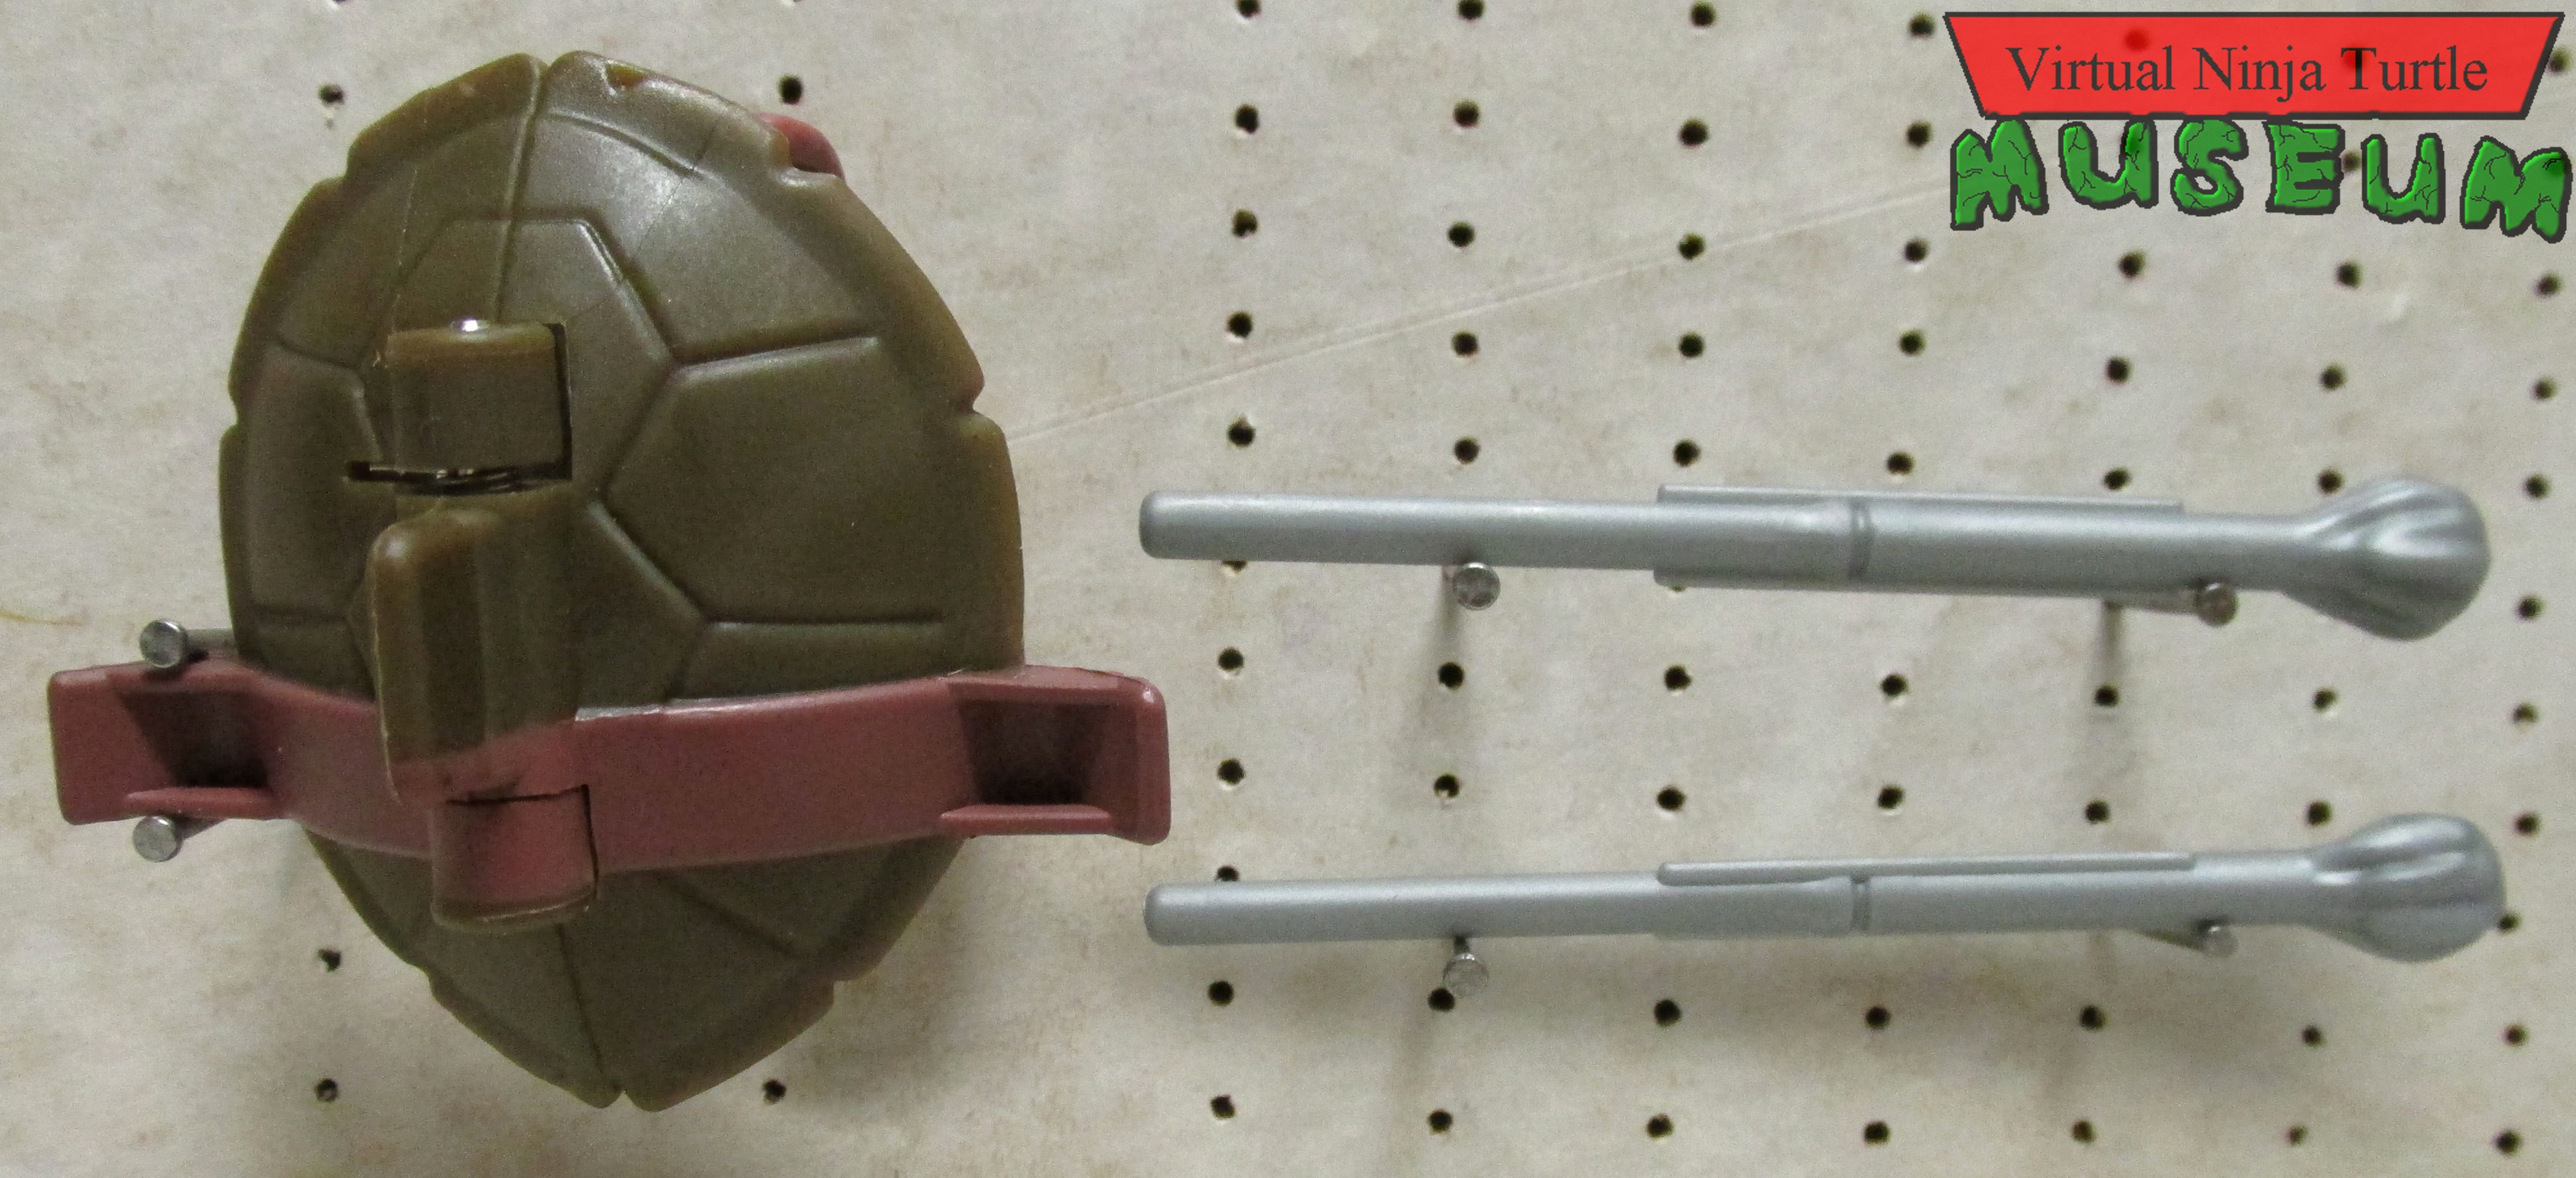 Battle Shell Raphael's shell and projectiles